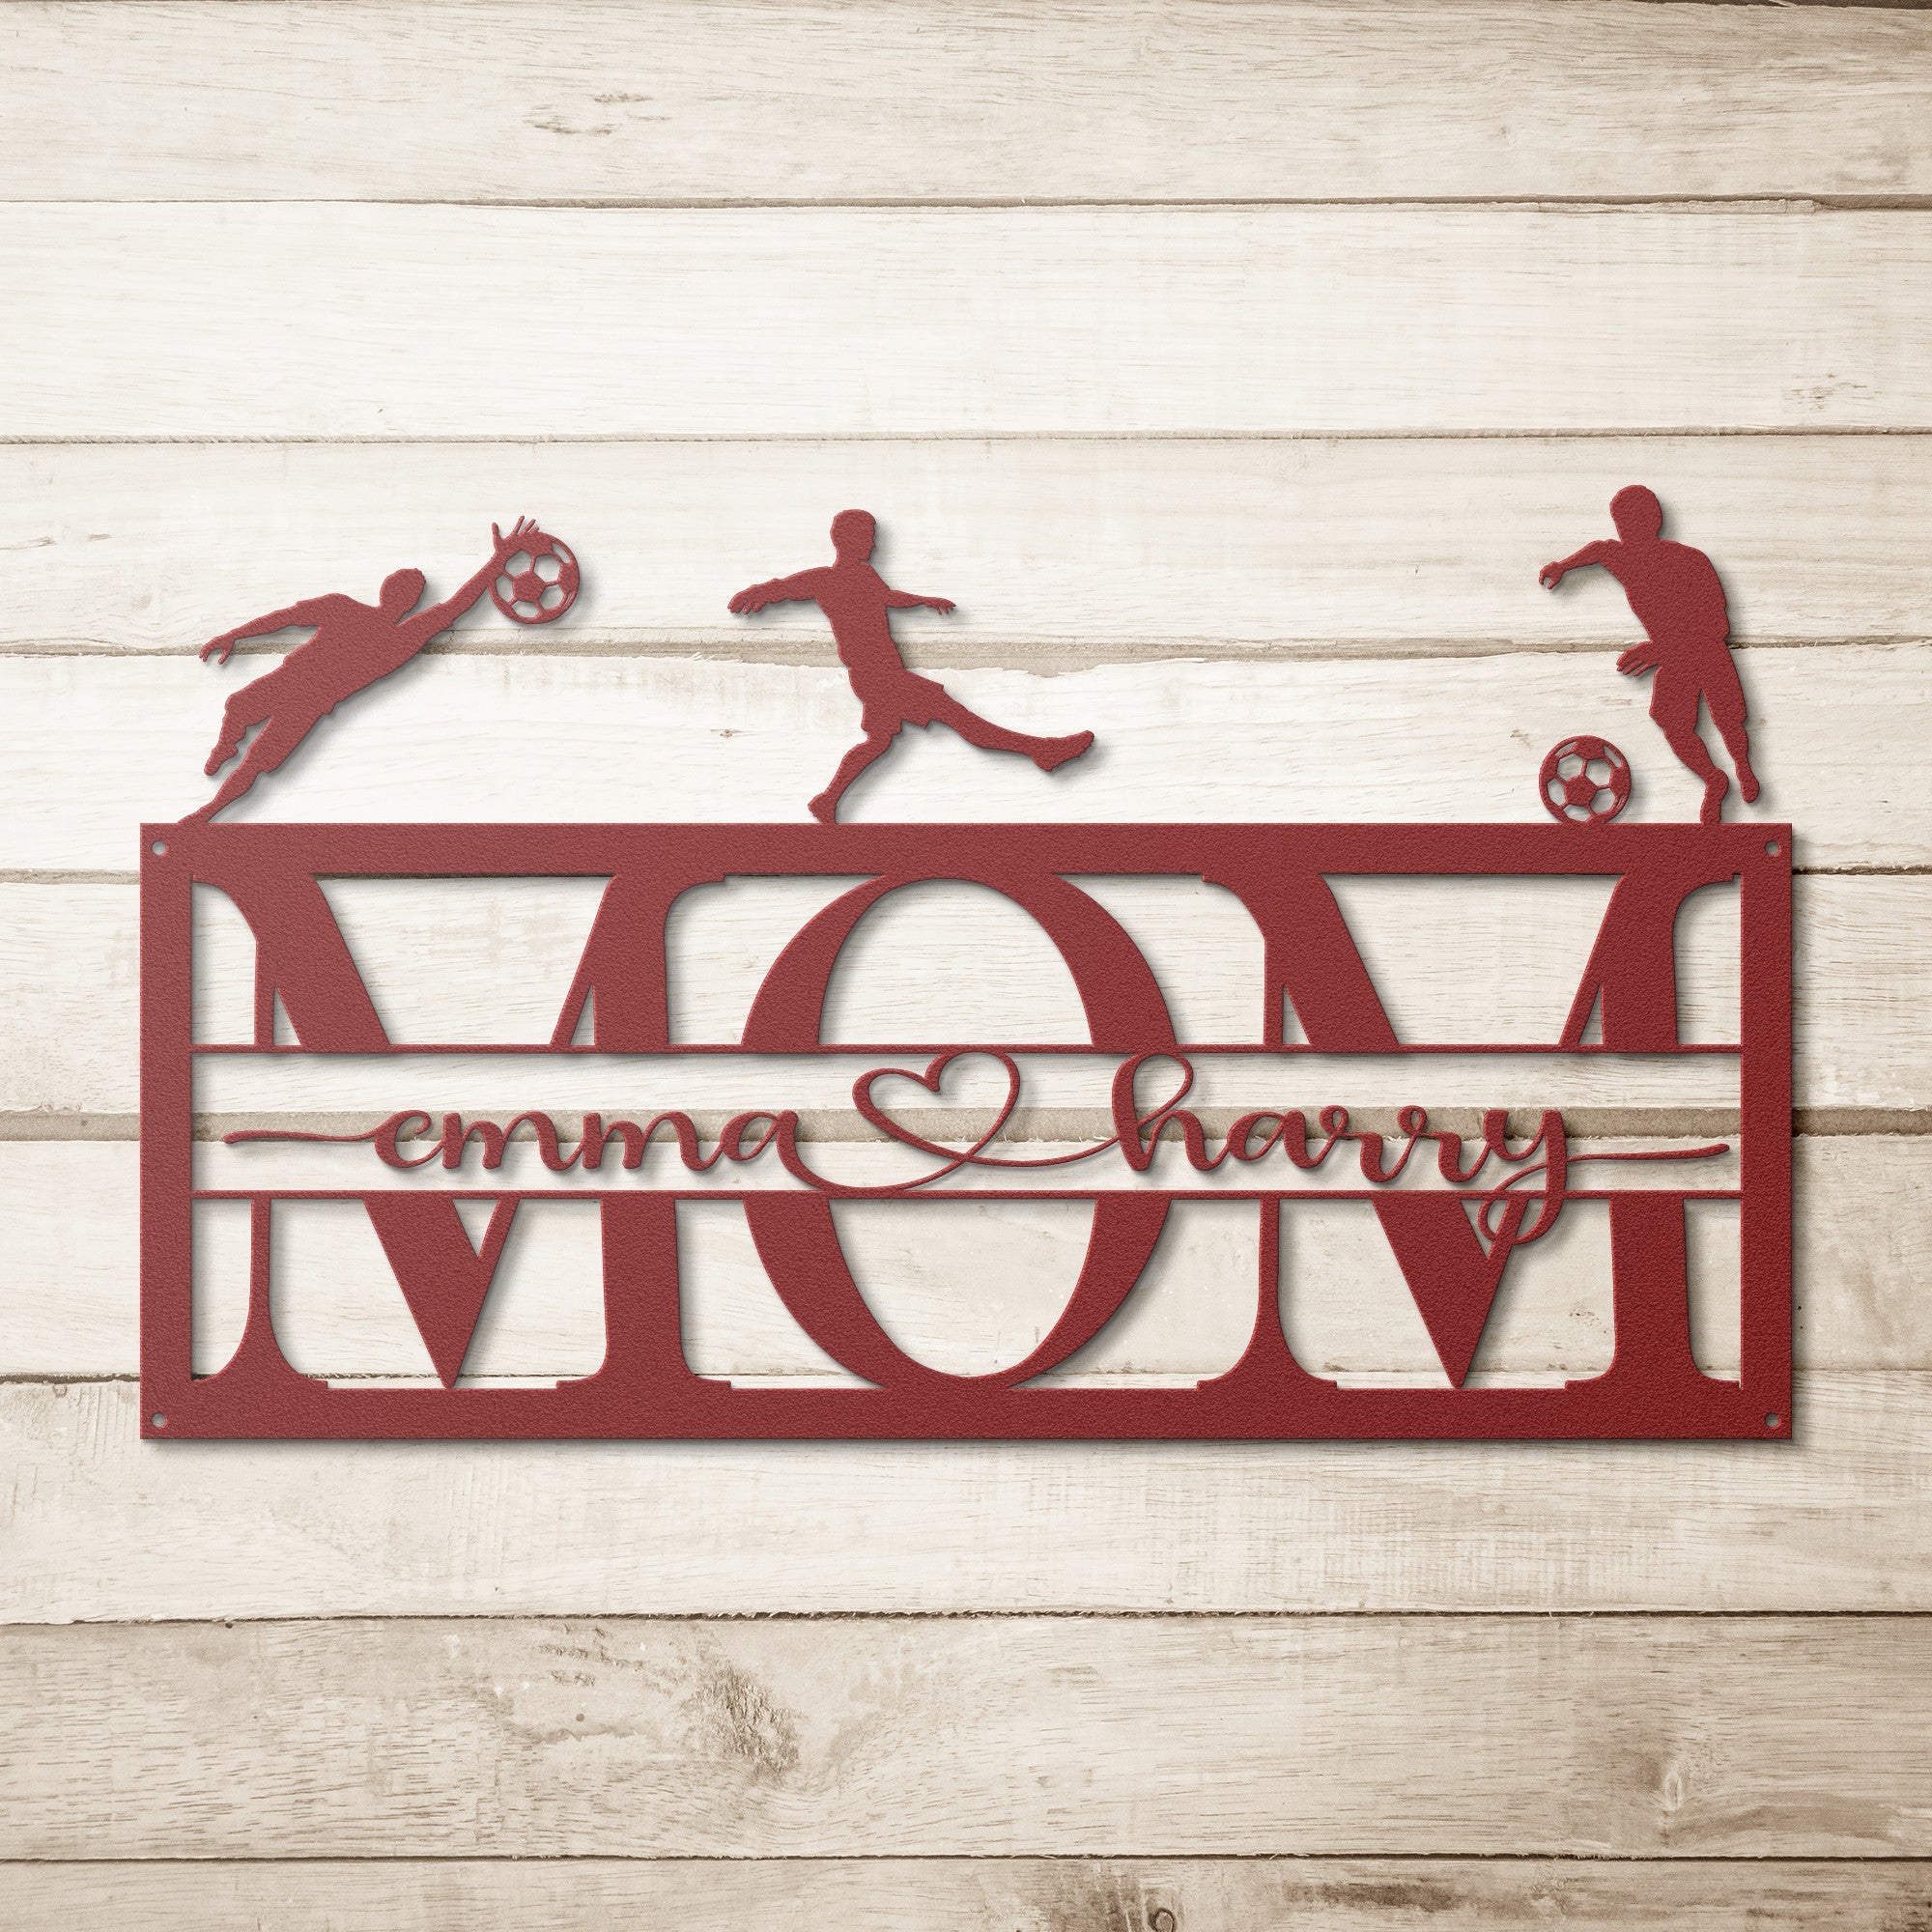 Personalized MOM Sign - Soccer Theme - Cool Metal Signs